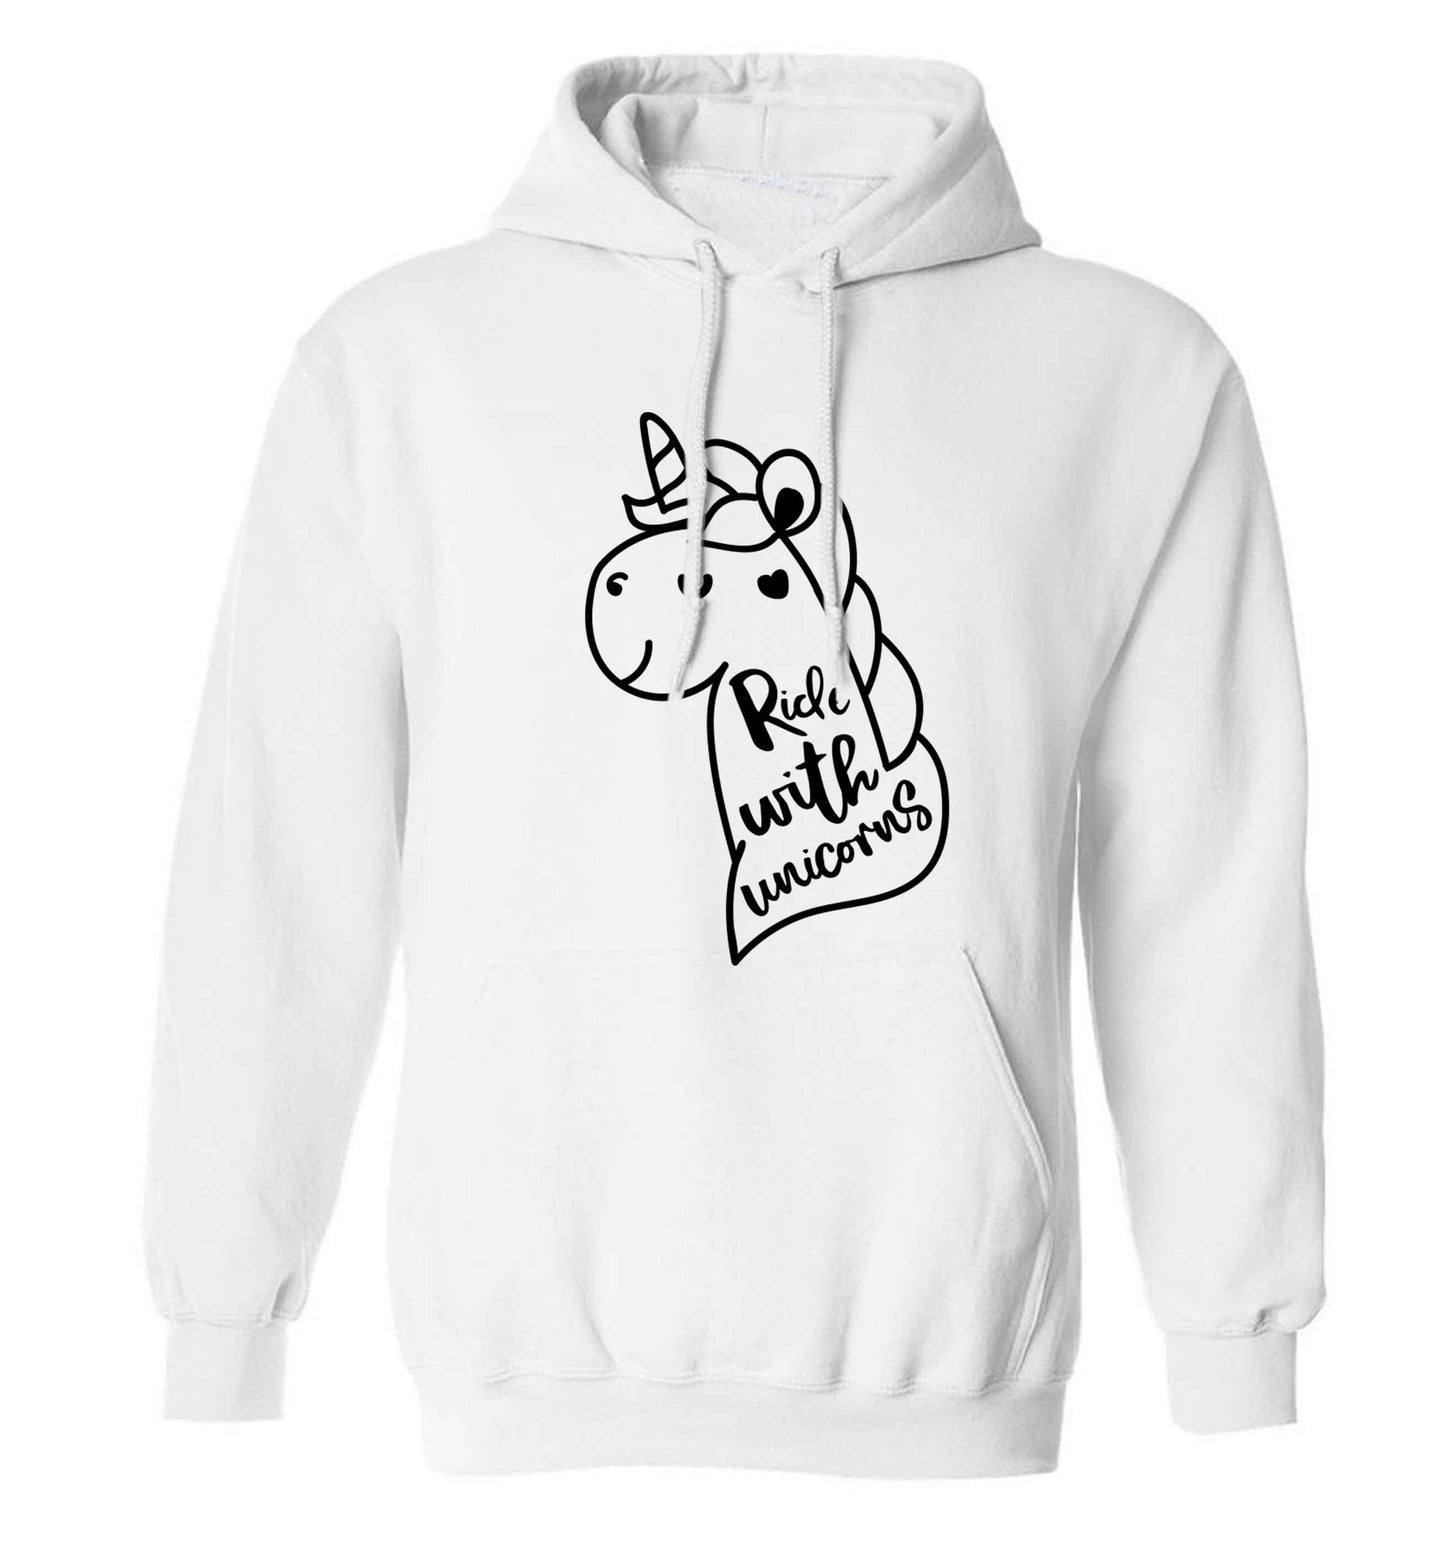 Ride with unicorns adults unisex white hoodie 2XL